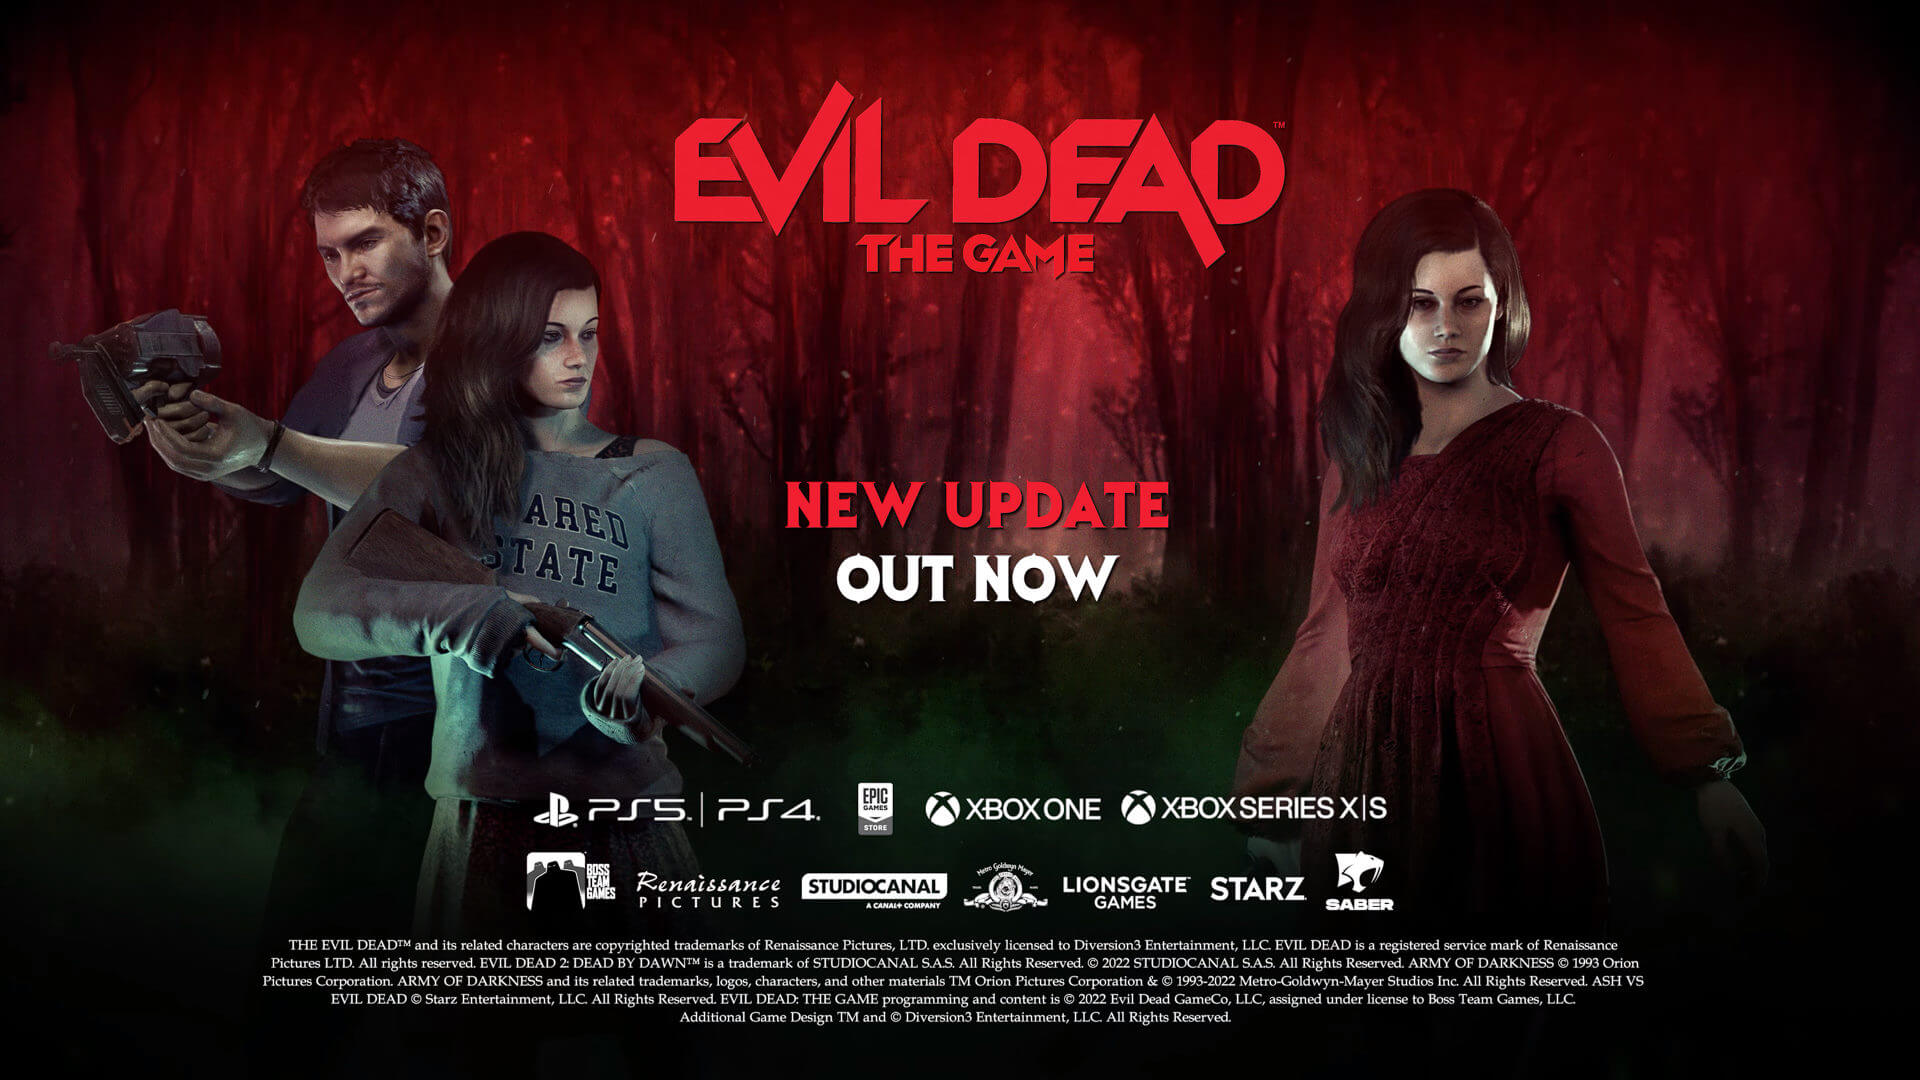 Evil Dead: The Game | Download and Buy Today - Epic Games Store